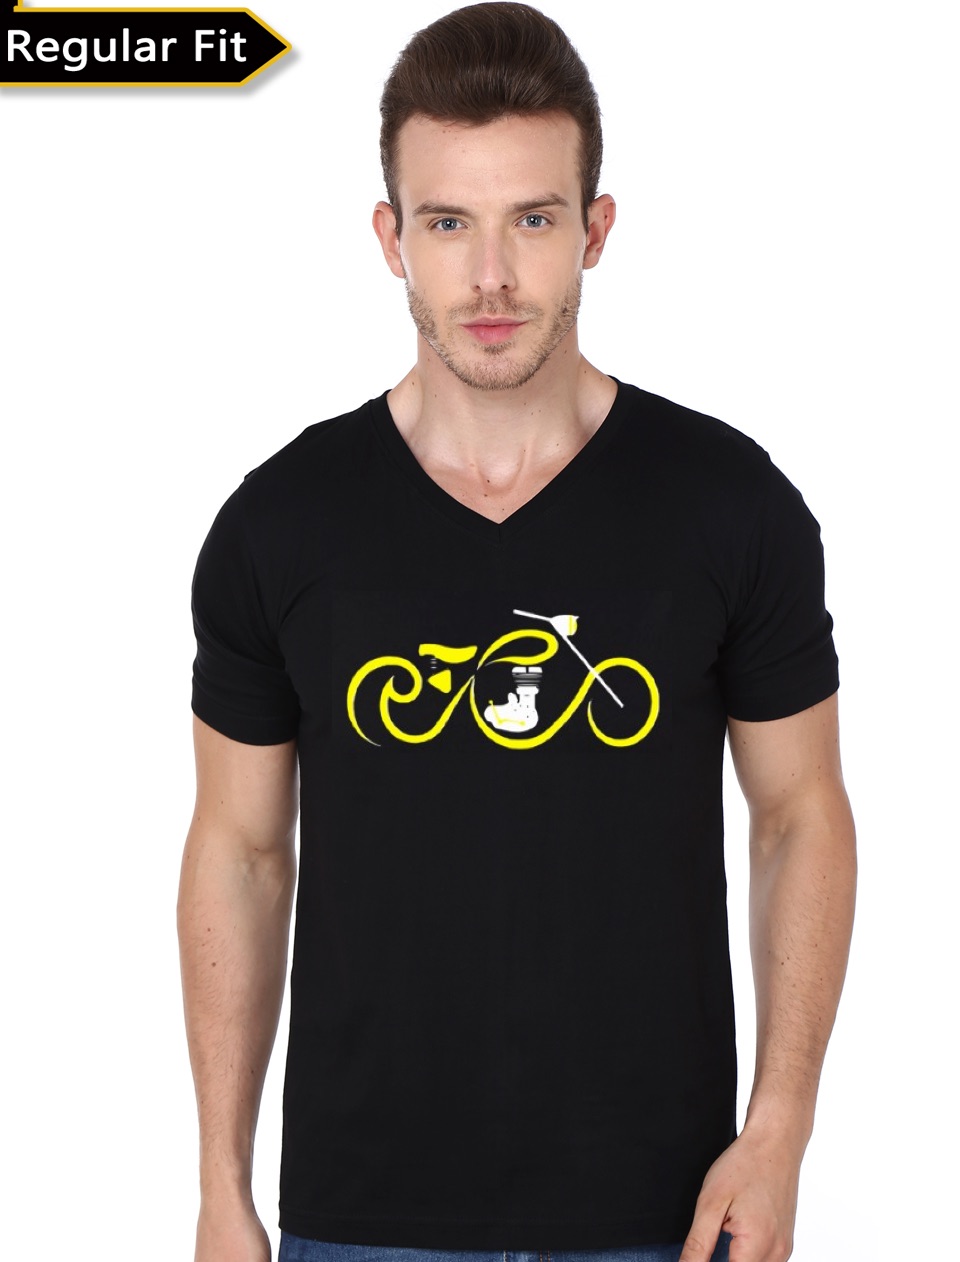 royal enfield t shirts online shopping in india